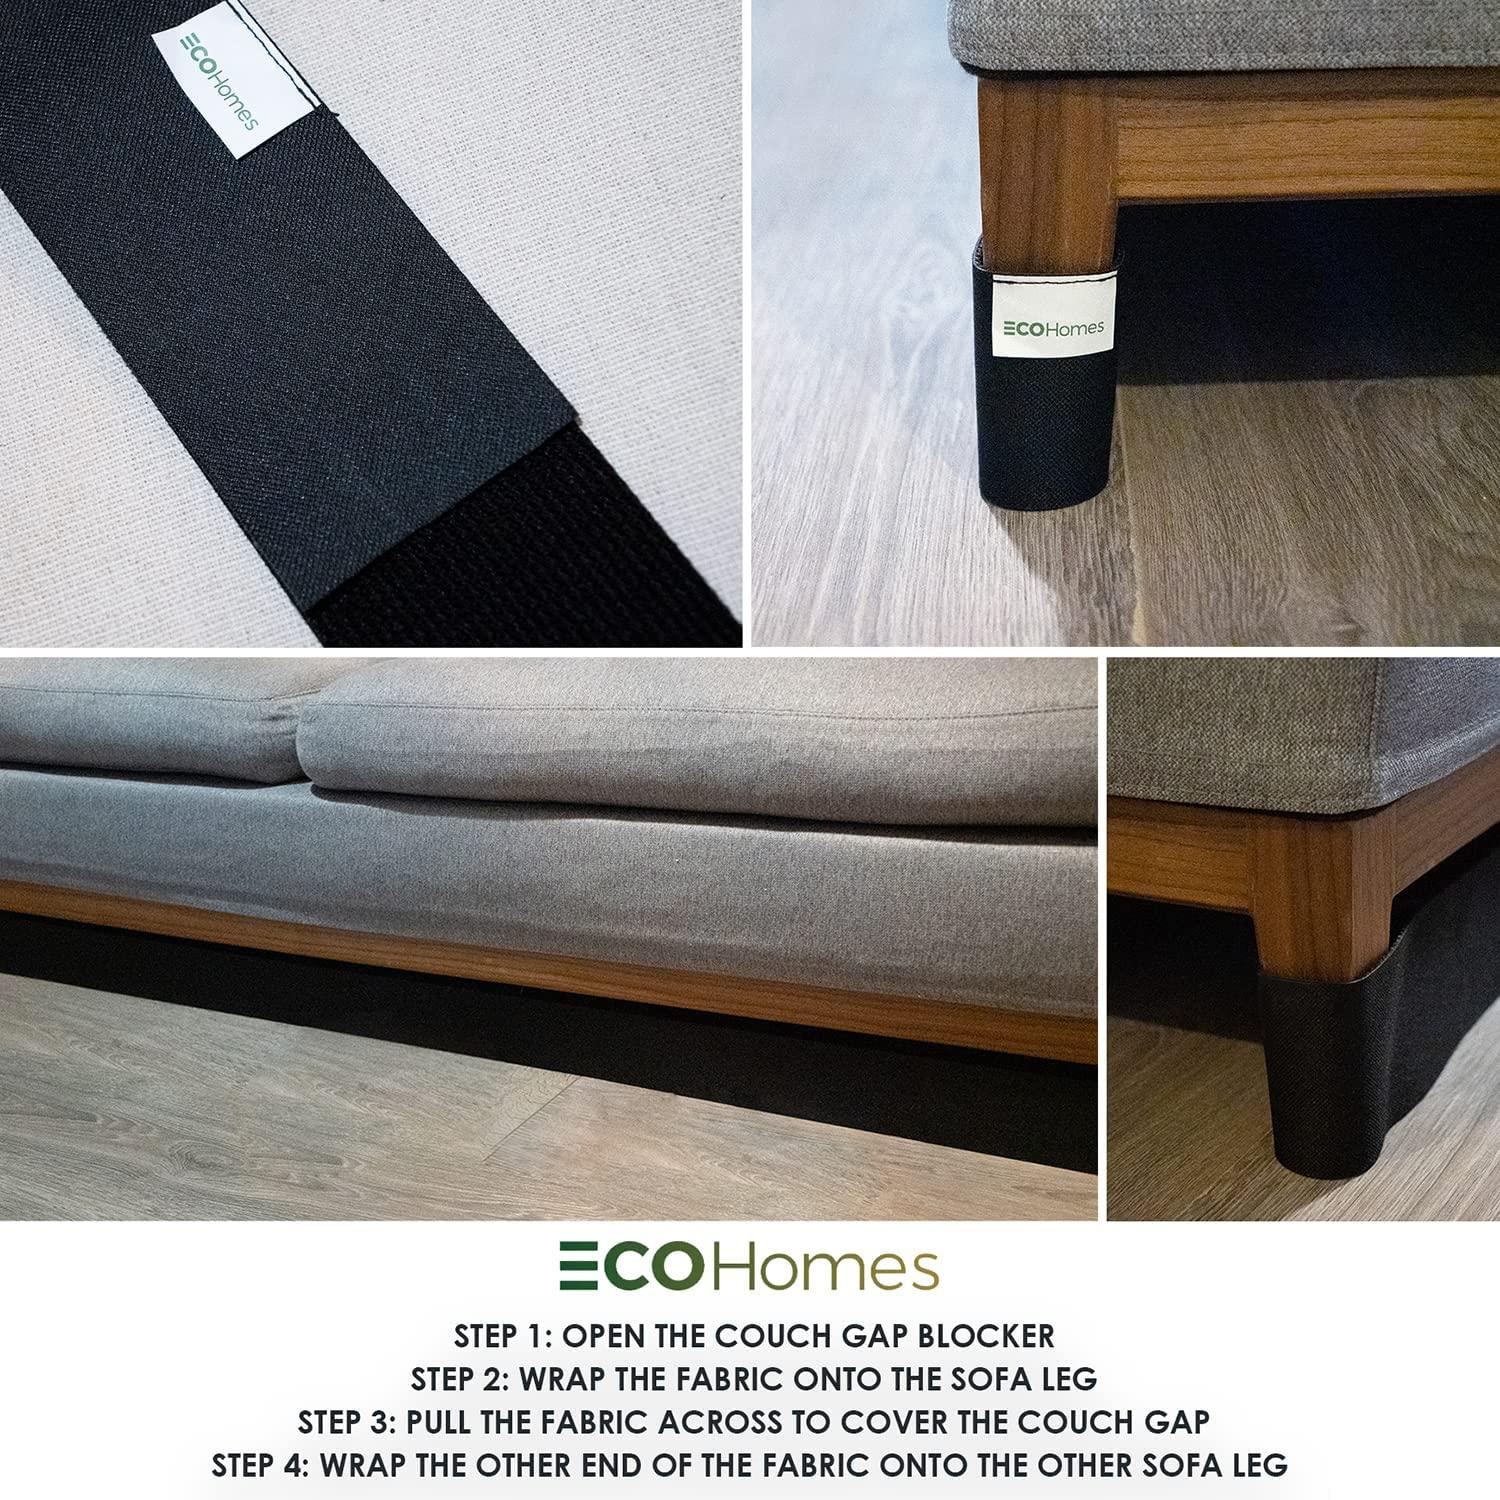 ECOHomes Under Couch Blocker Toy Blocker - Stop Things from Going